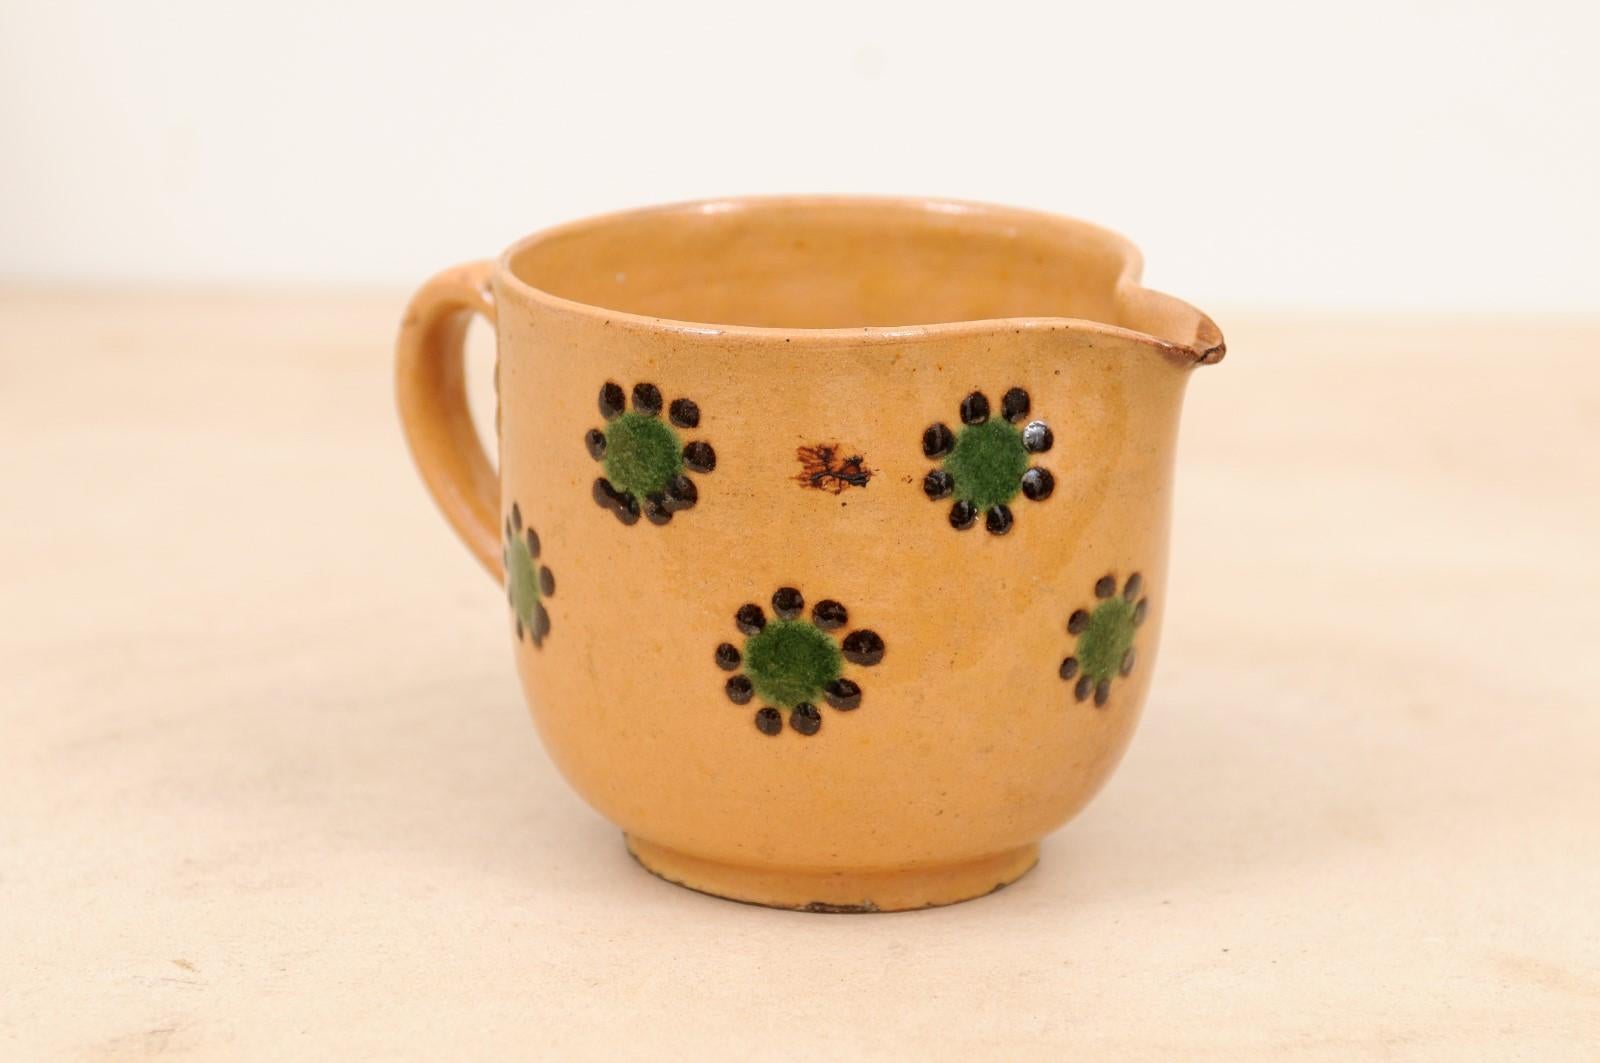 A French pottery pitcher from the 19th century, with peach glaze accented with green and chocolate décor. Created in France during the 19th century, this rustic pitcher features a peach colored ground perfectly highlighted by green and chocolate